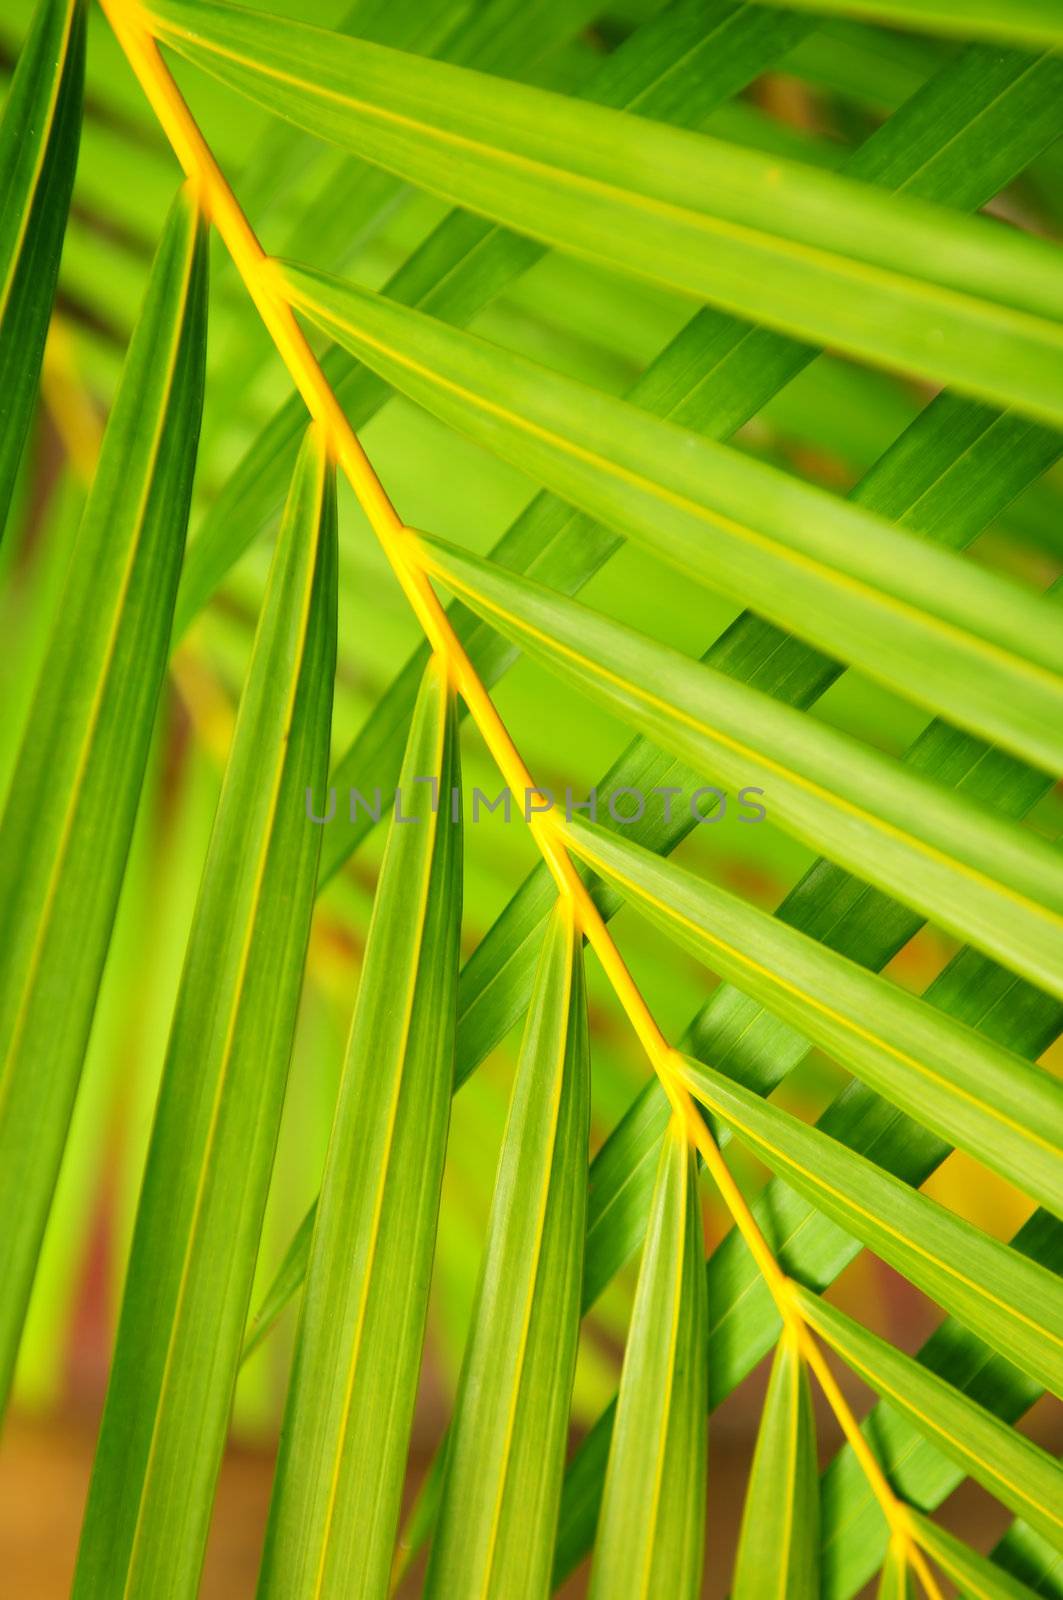 Botanical background of green palm tree leaves close up